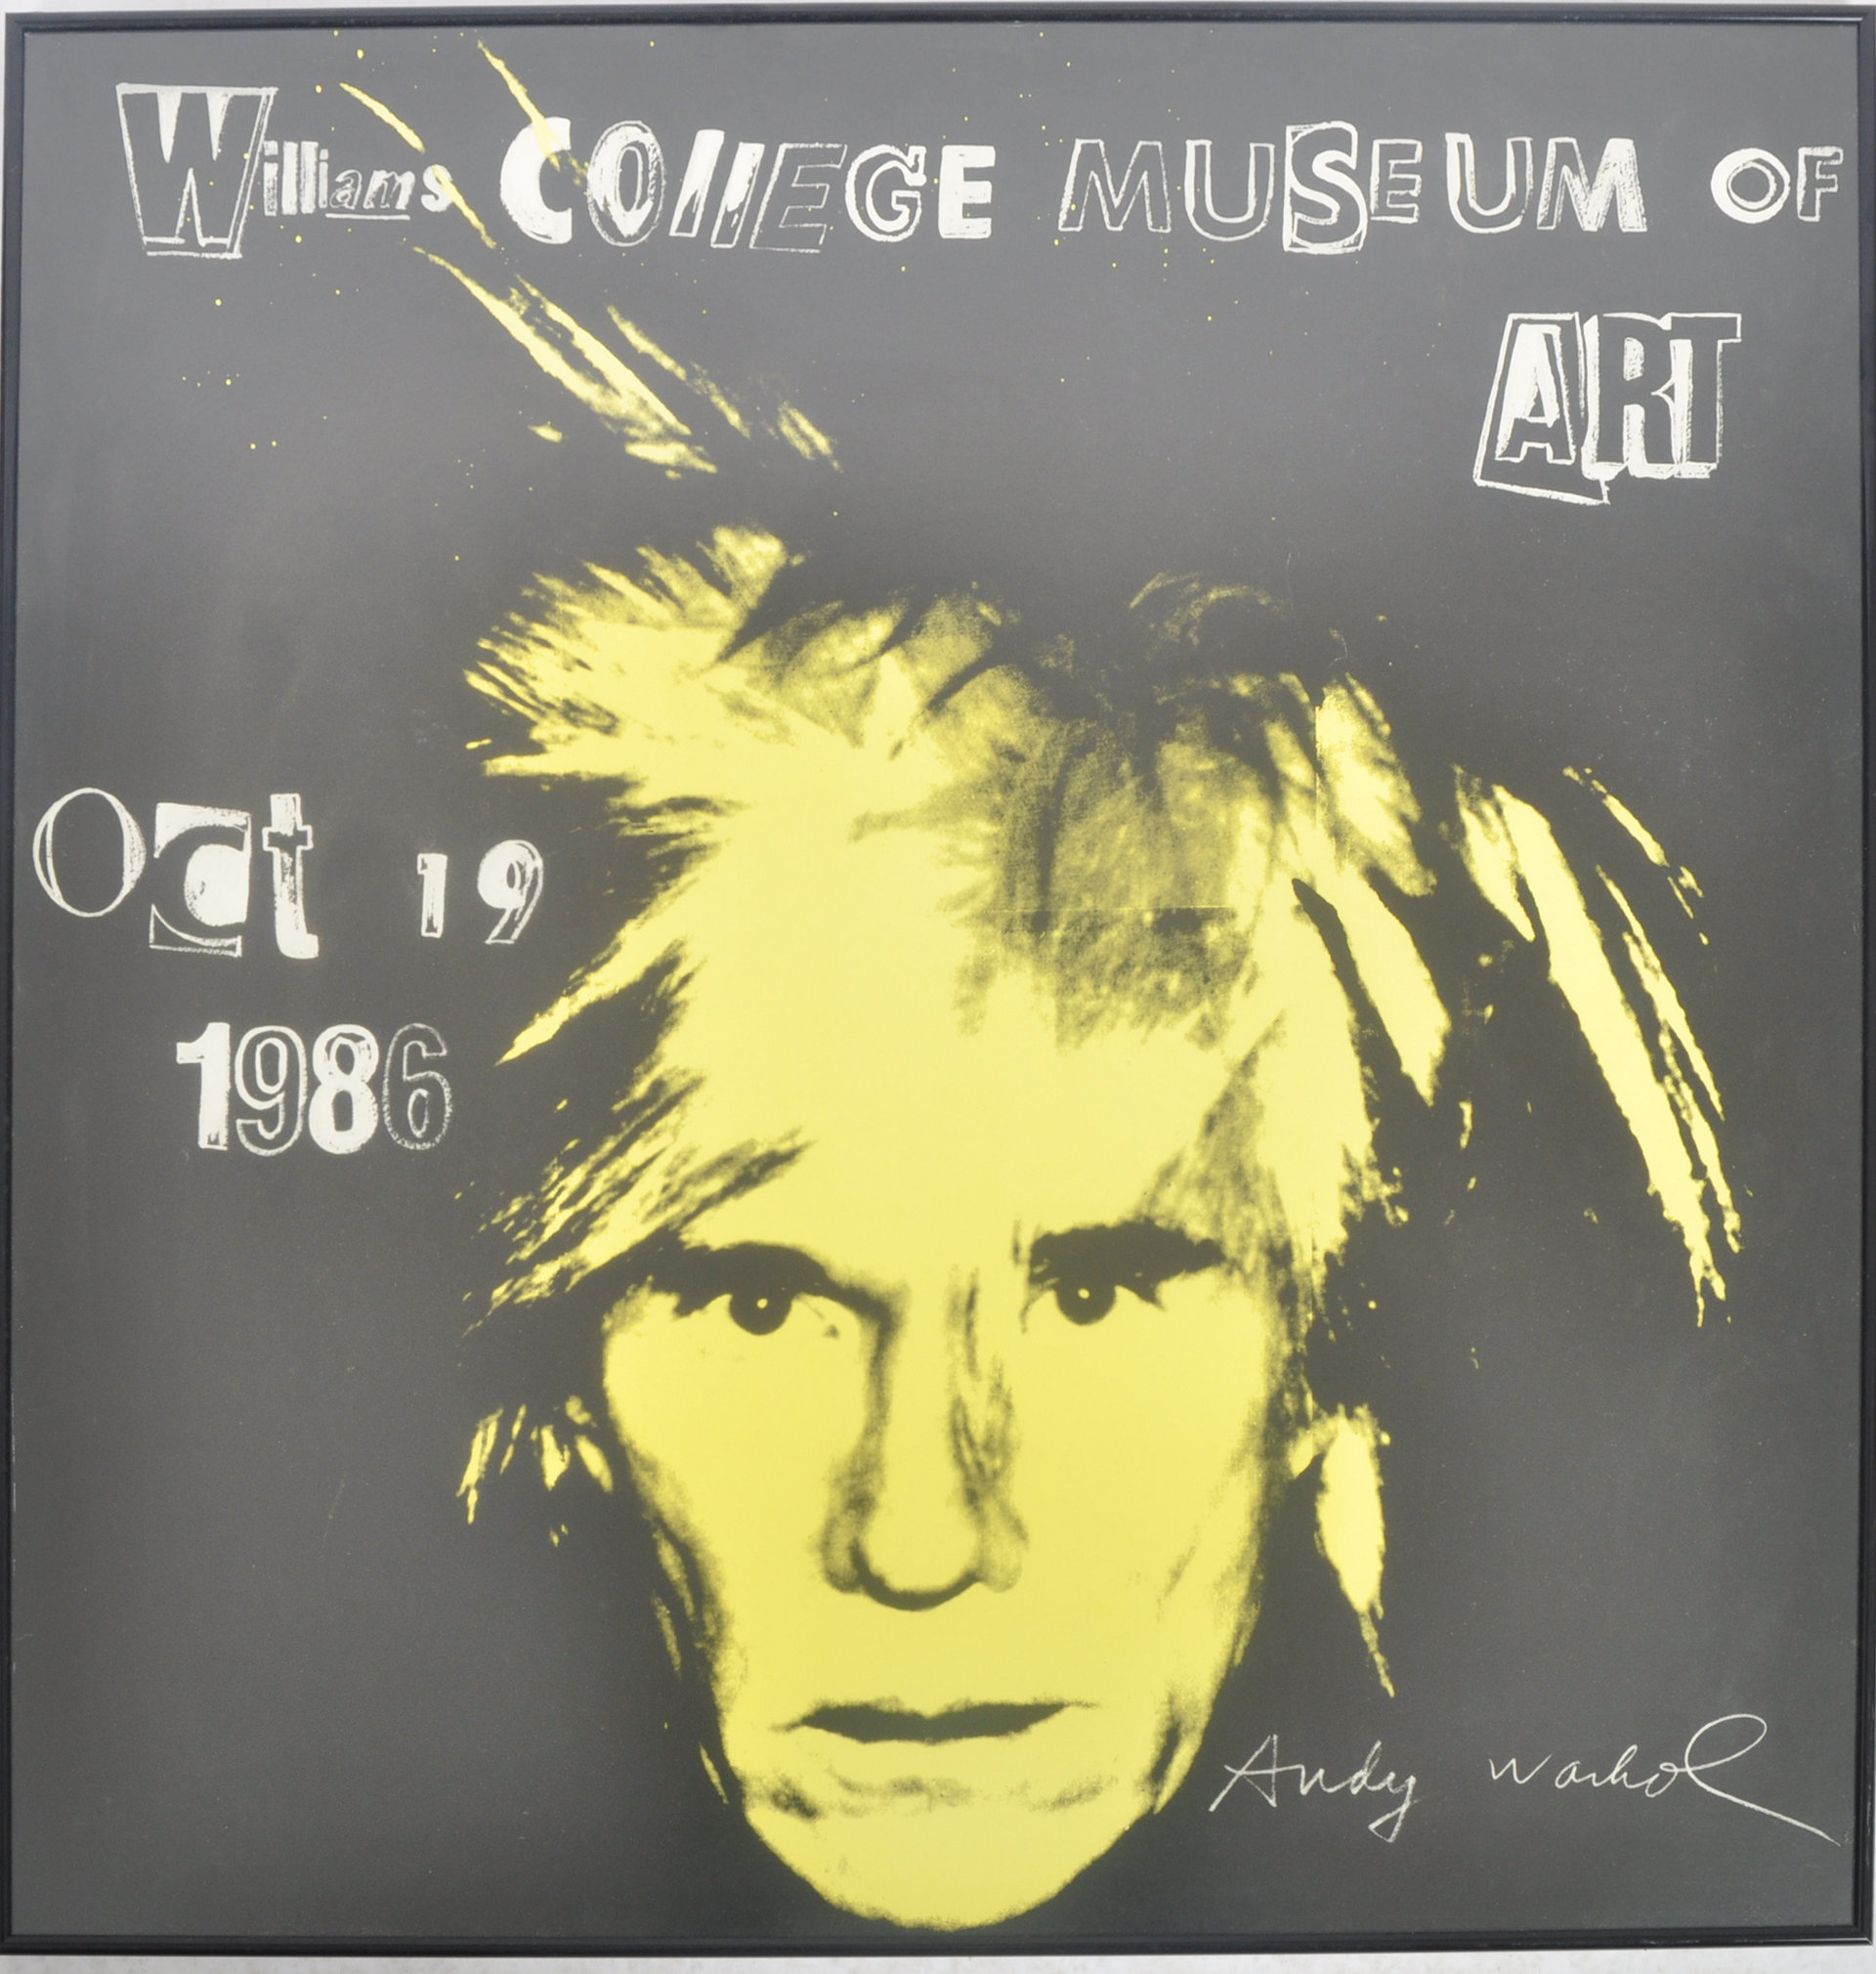 AFTER ANDY WARHOL - WILLIAMS COLLEGE LITHOGRAPH - Image 2 of 8